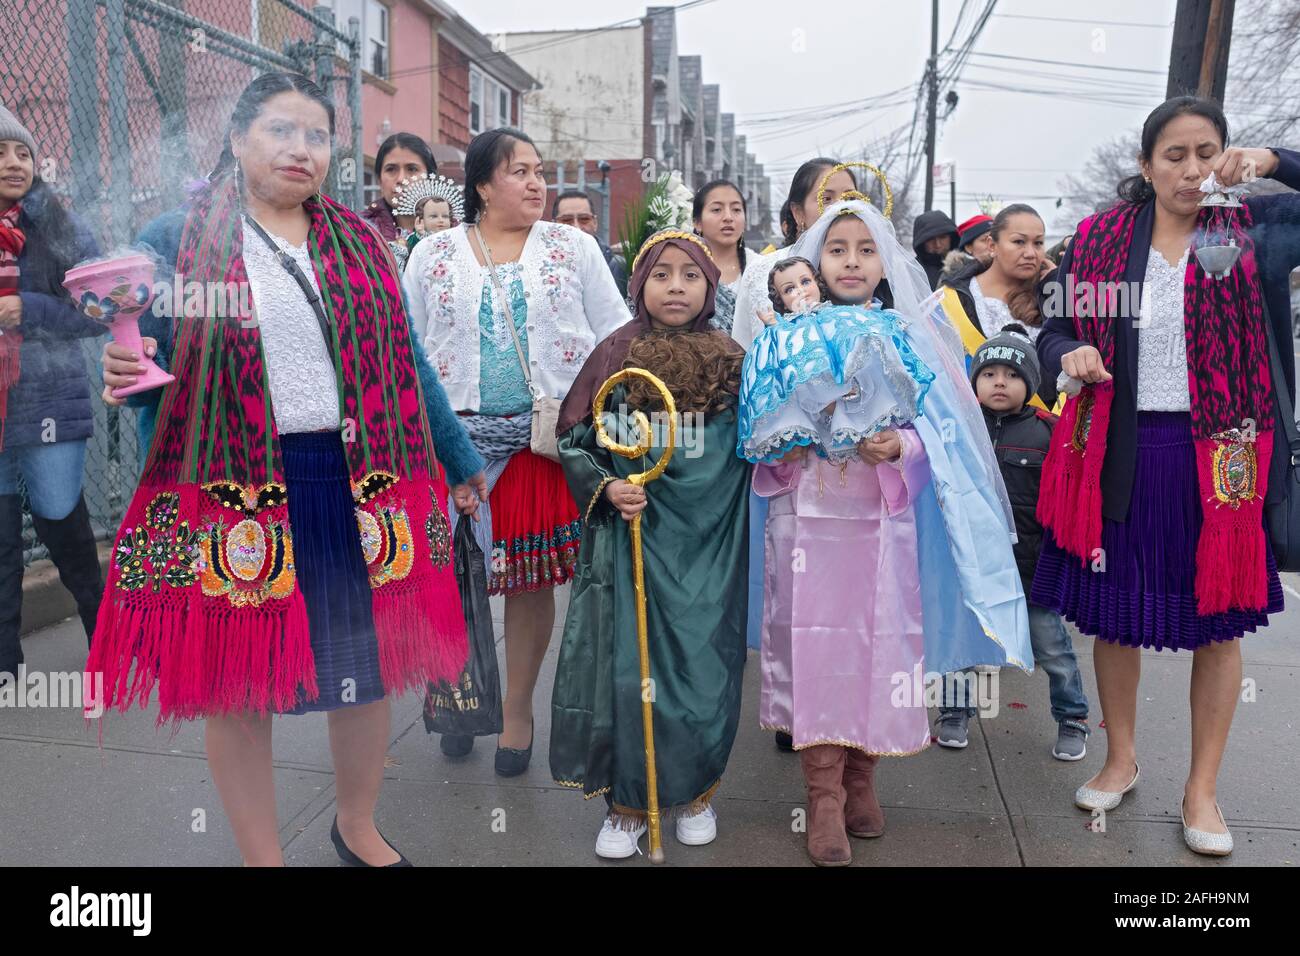 Ecuadorian Americans Catholics march in mid December to celebrate the birth of Jesus. The children are dressed as Joseph & Mary. Corona, Queens, NYC. Stock Photo